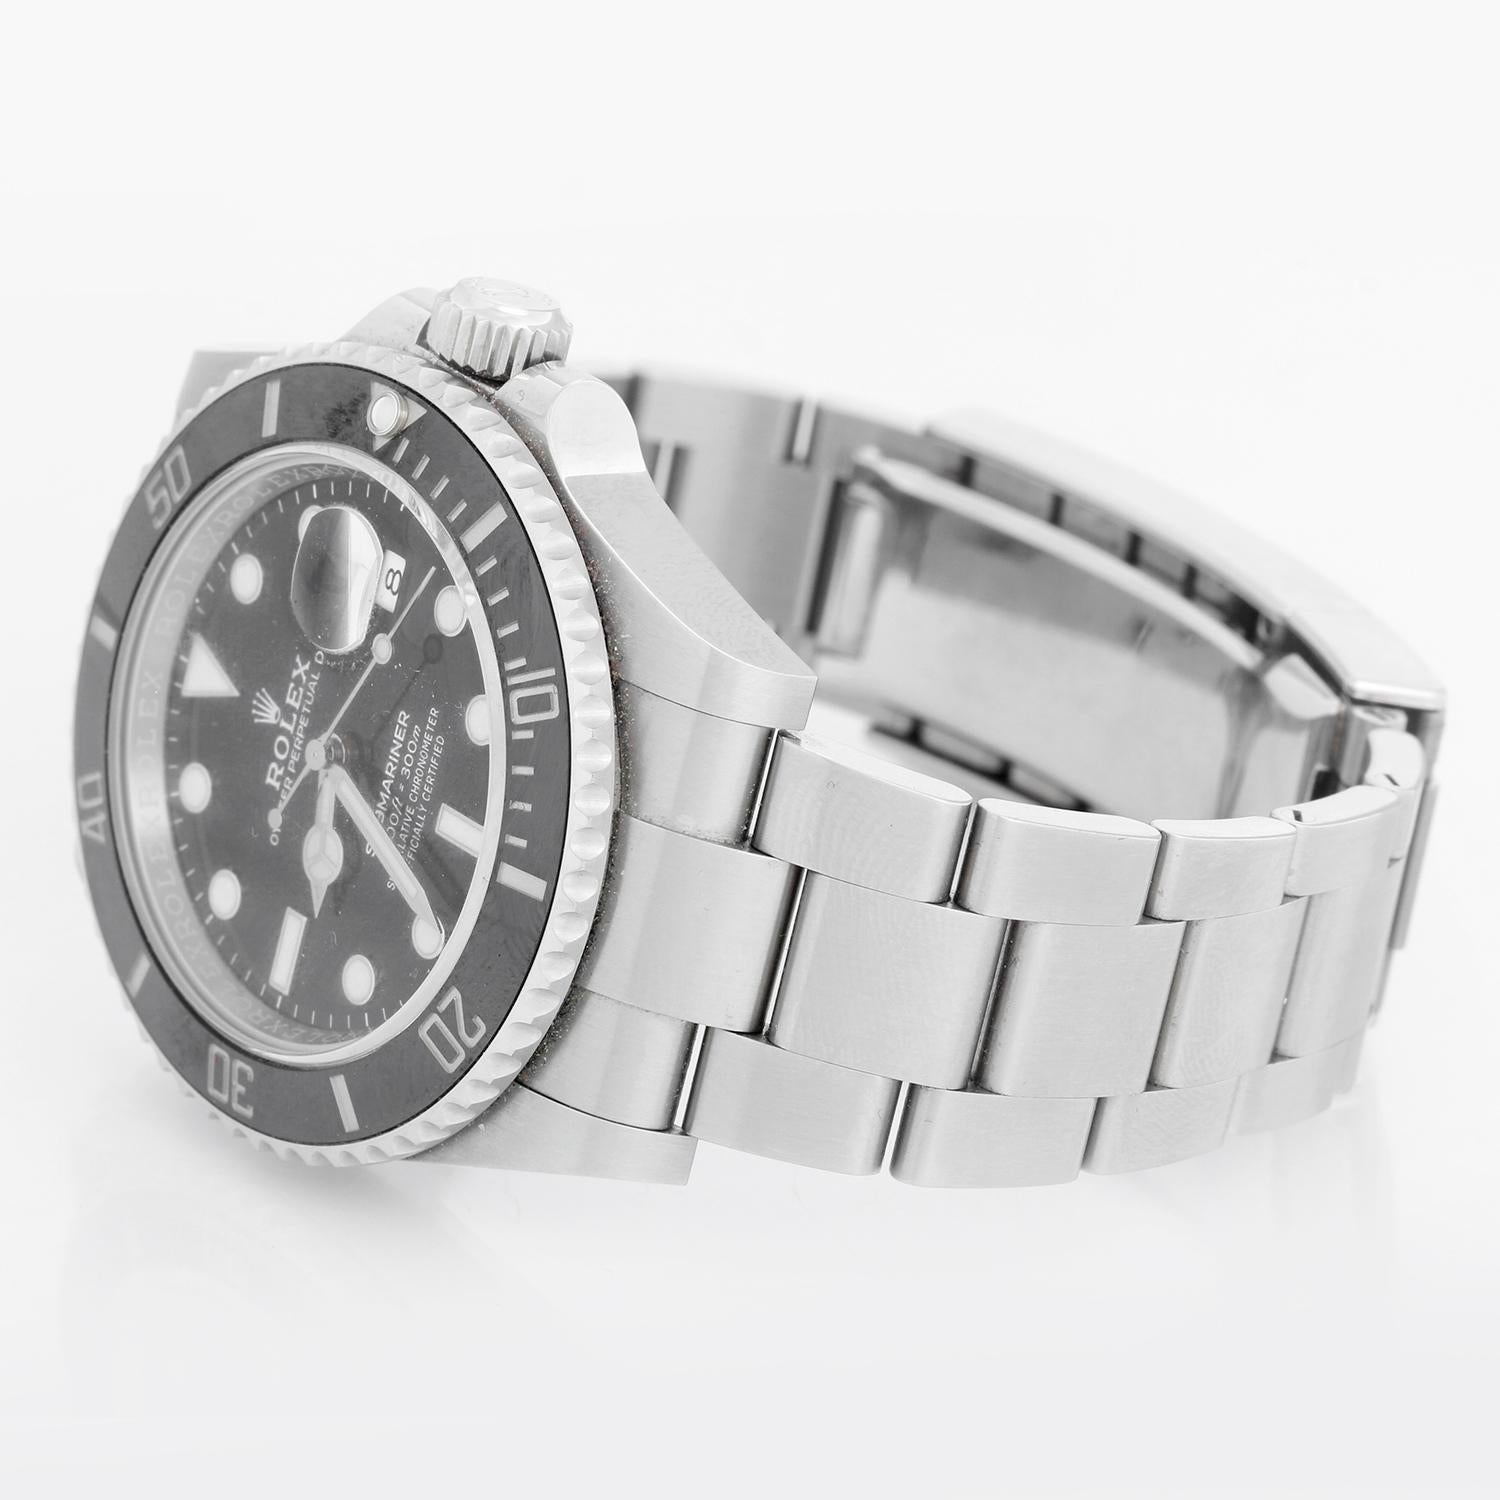 Rolex Submariner Date Men's Stainless Steel Watch 126610LN - Automatic winding, 31 jewels, pressure proof to 1,000 feet. Stainless steel case with time-lapse Cerachrom black bezel (41mm). Black dial with luminous markers; date at 3 o'clock.